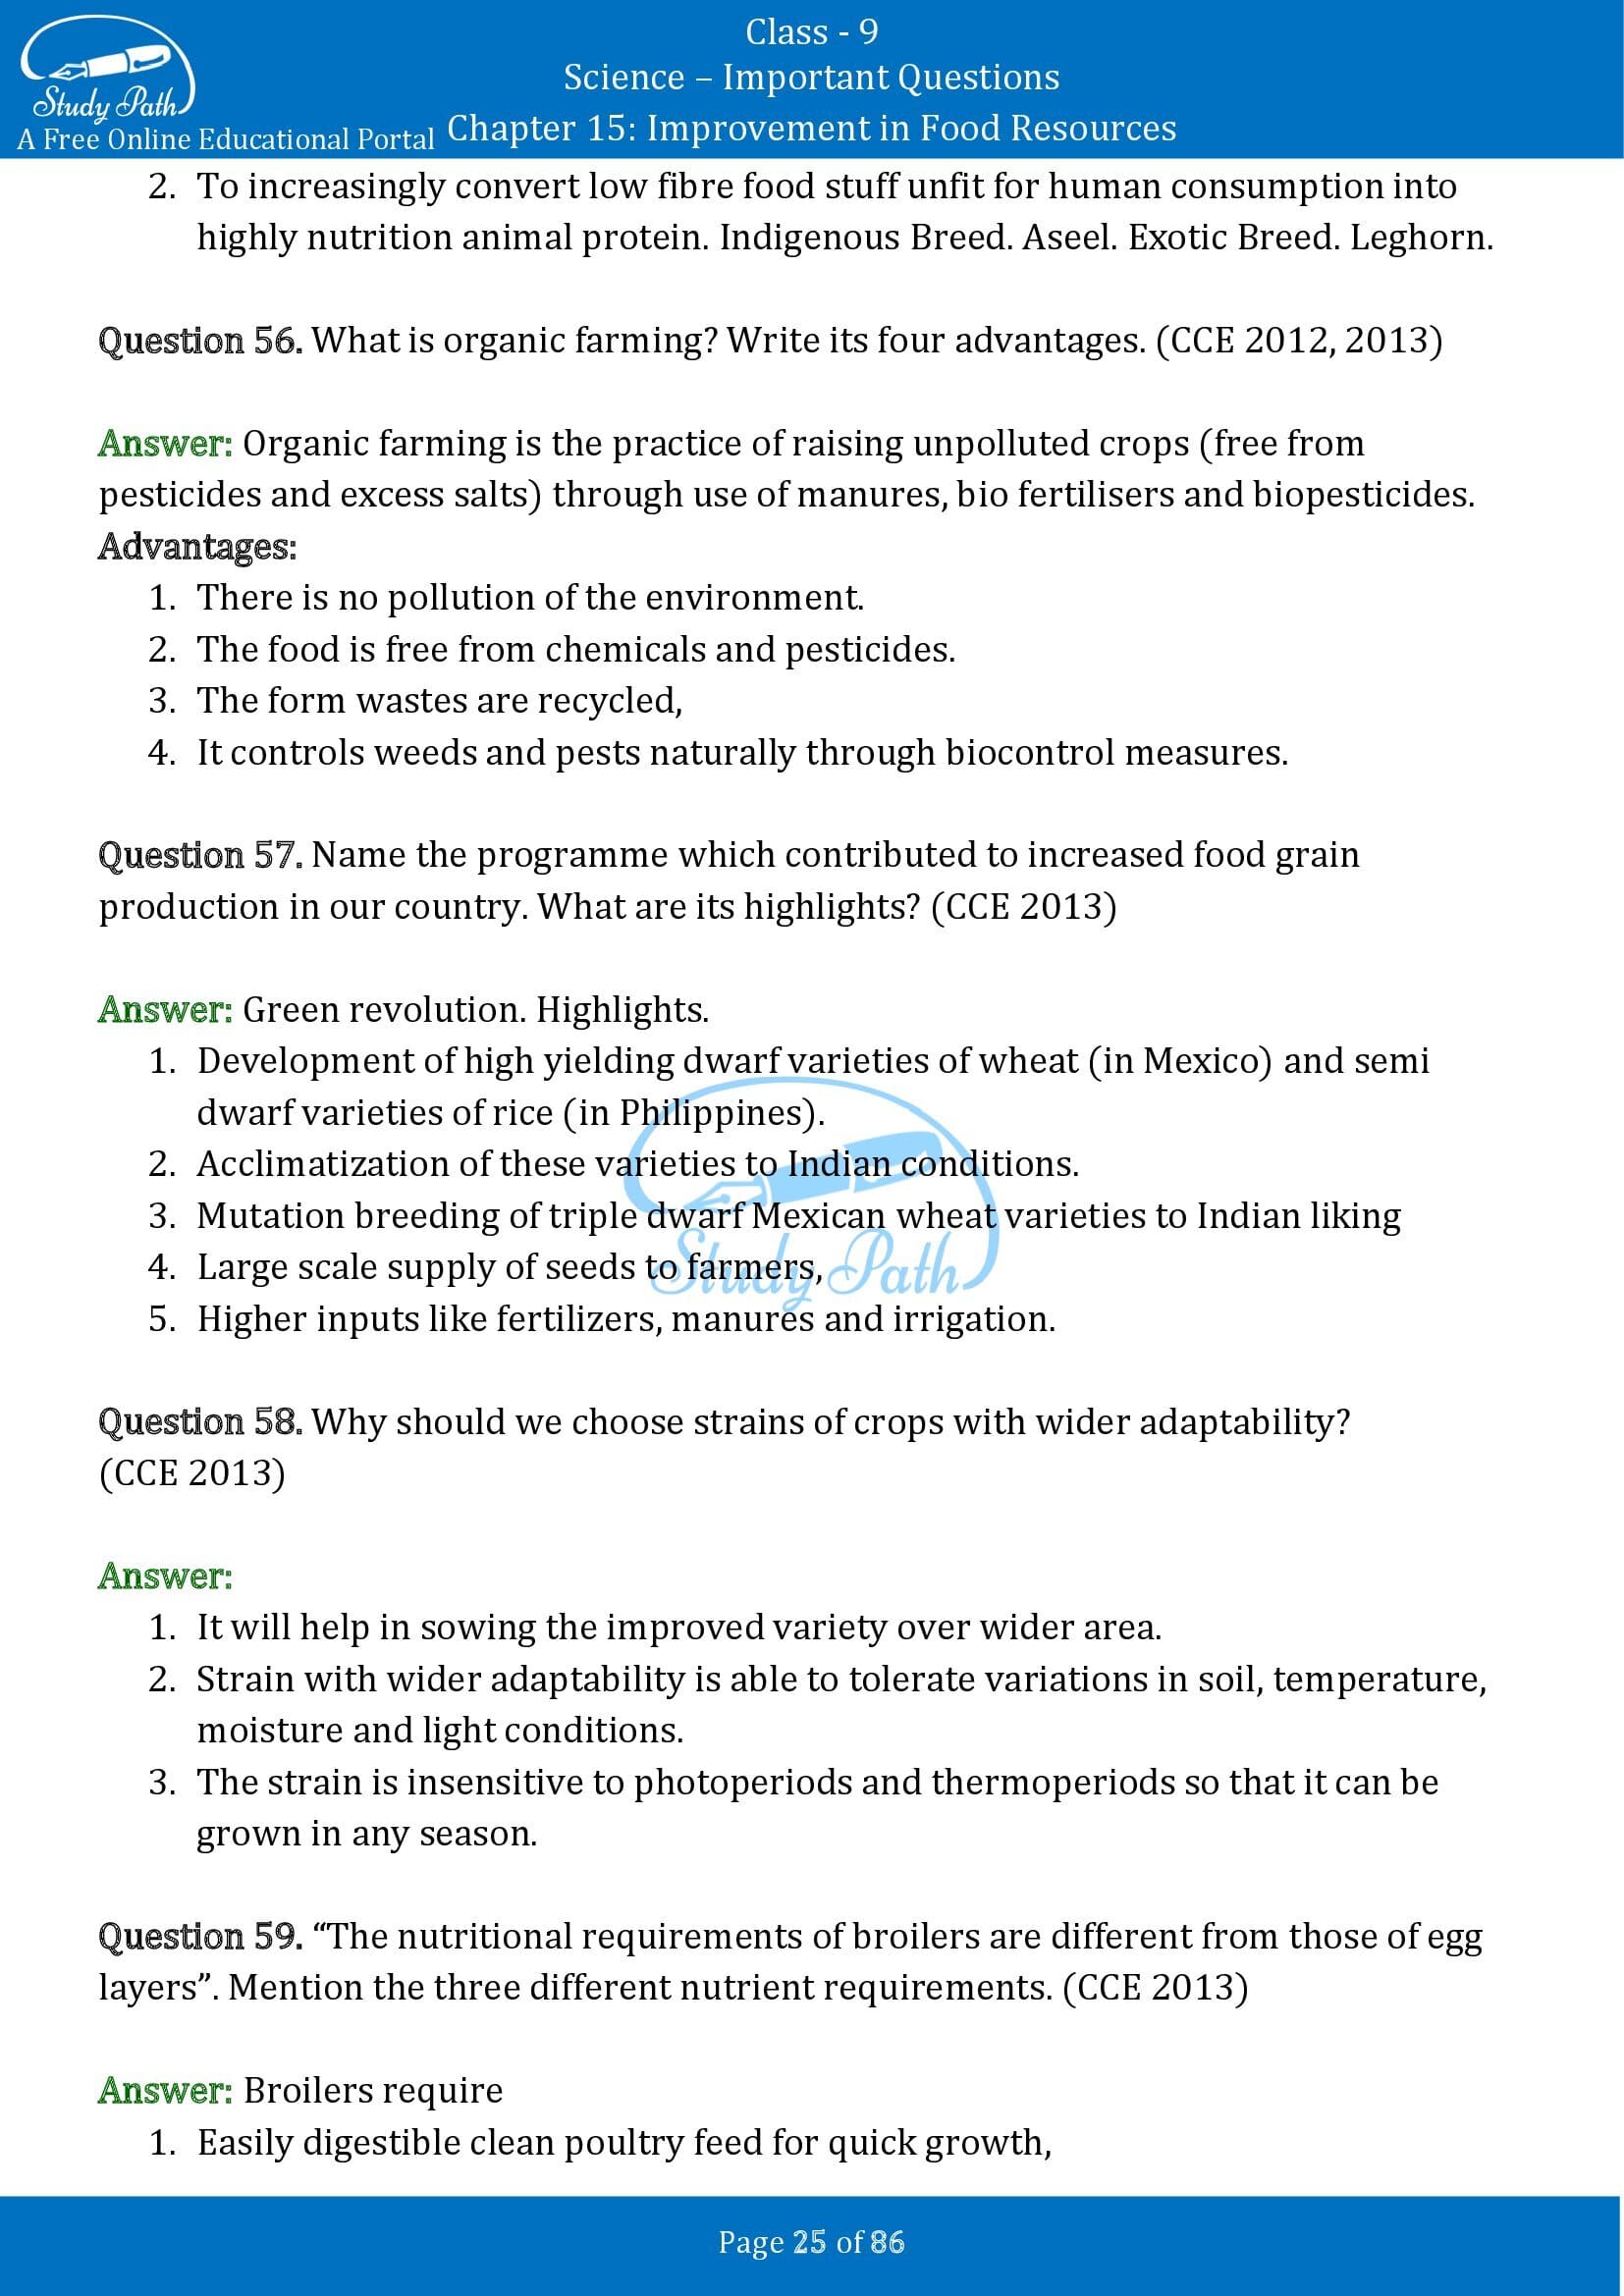 Important Questions for Class 9 Science Chapter 15 Improvement in Food Resources 00025